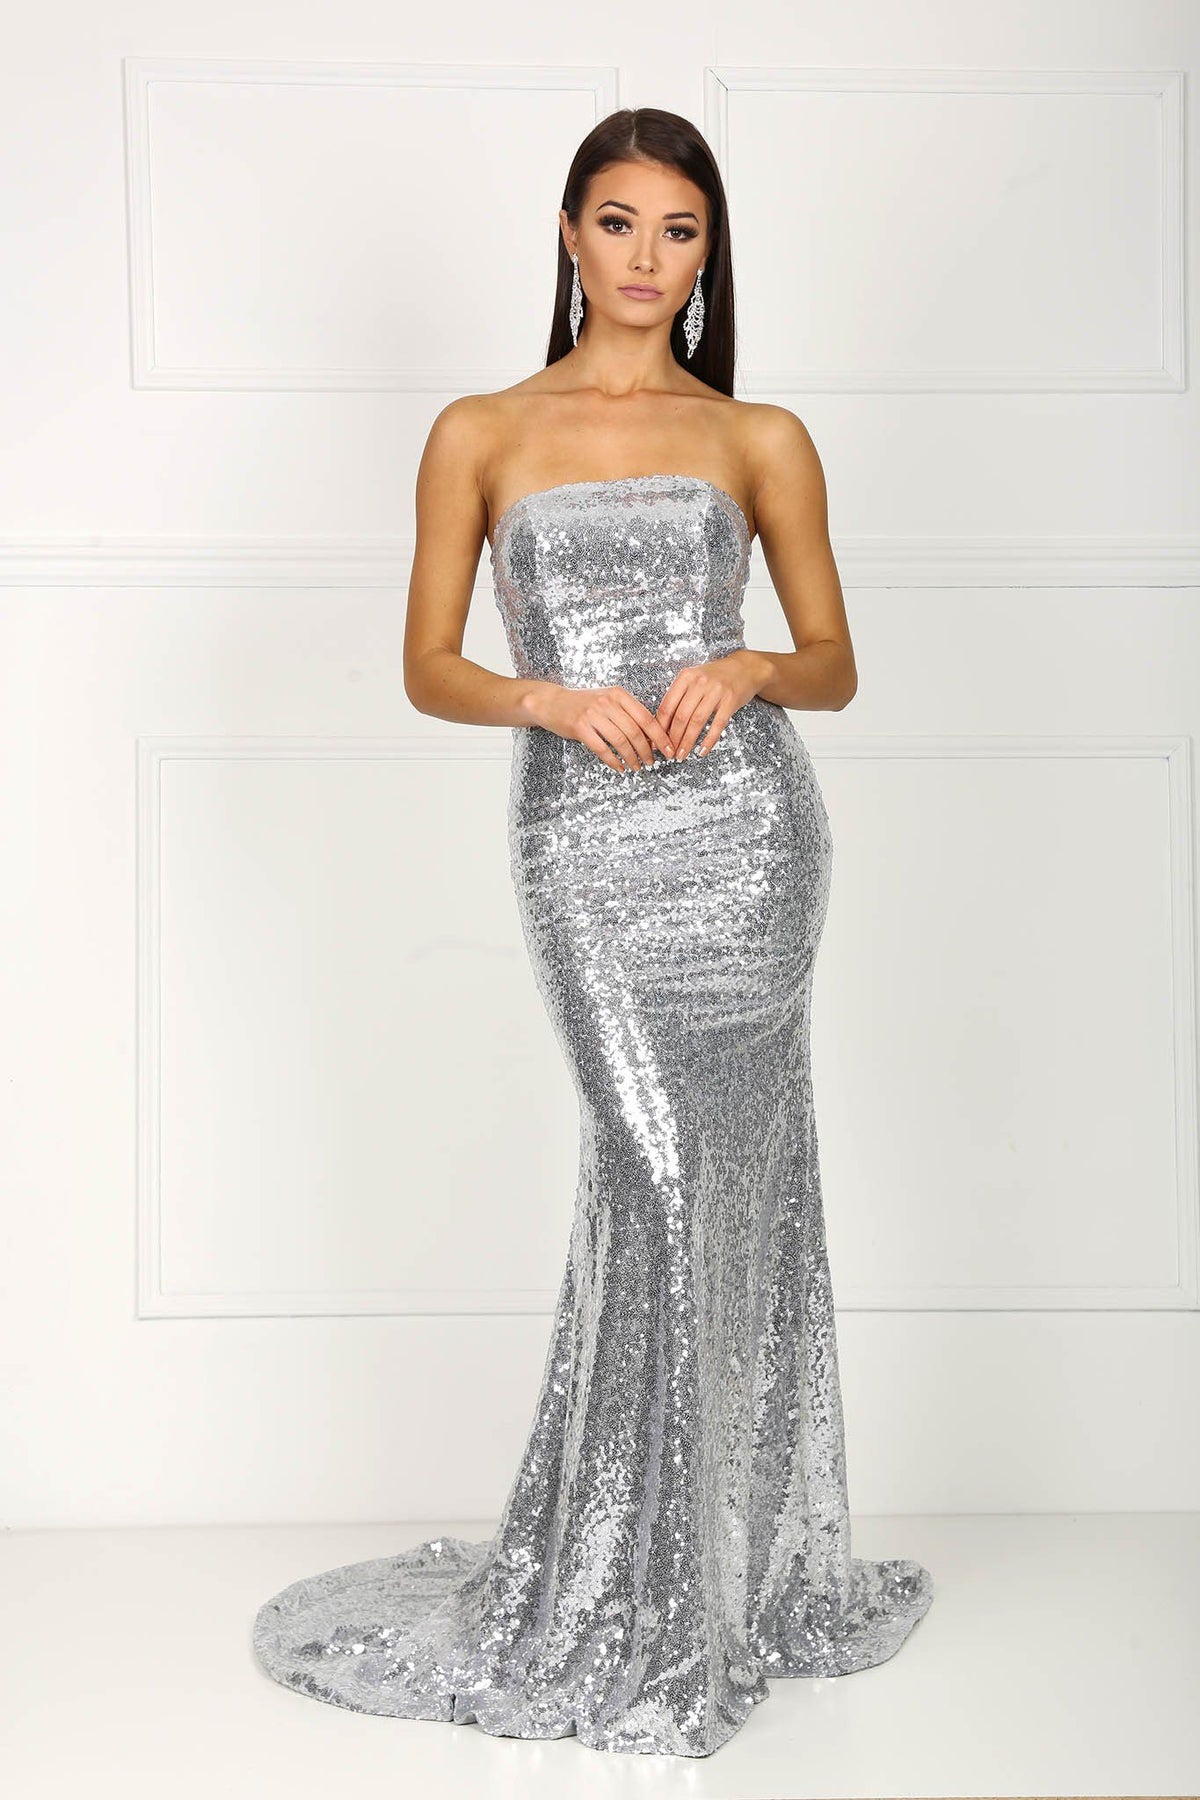 Strapless straight neckline form-fitted sequins evening gown in silver color